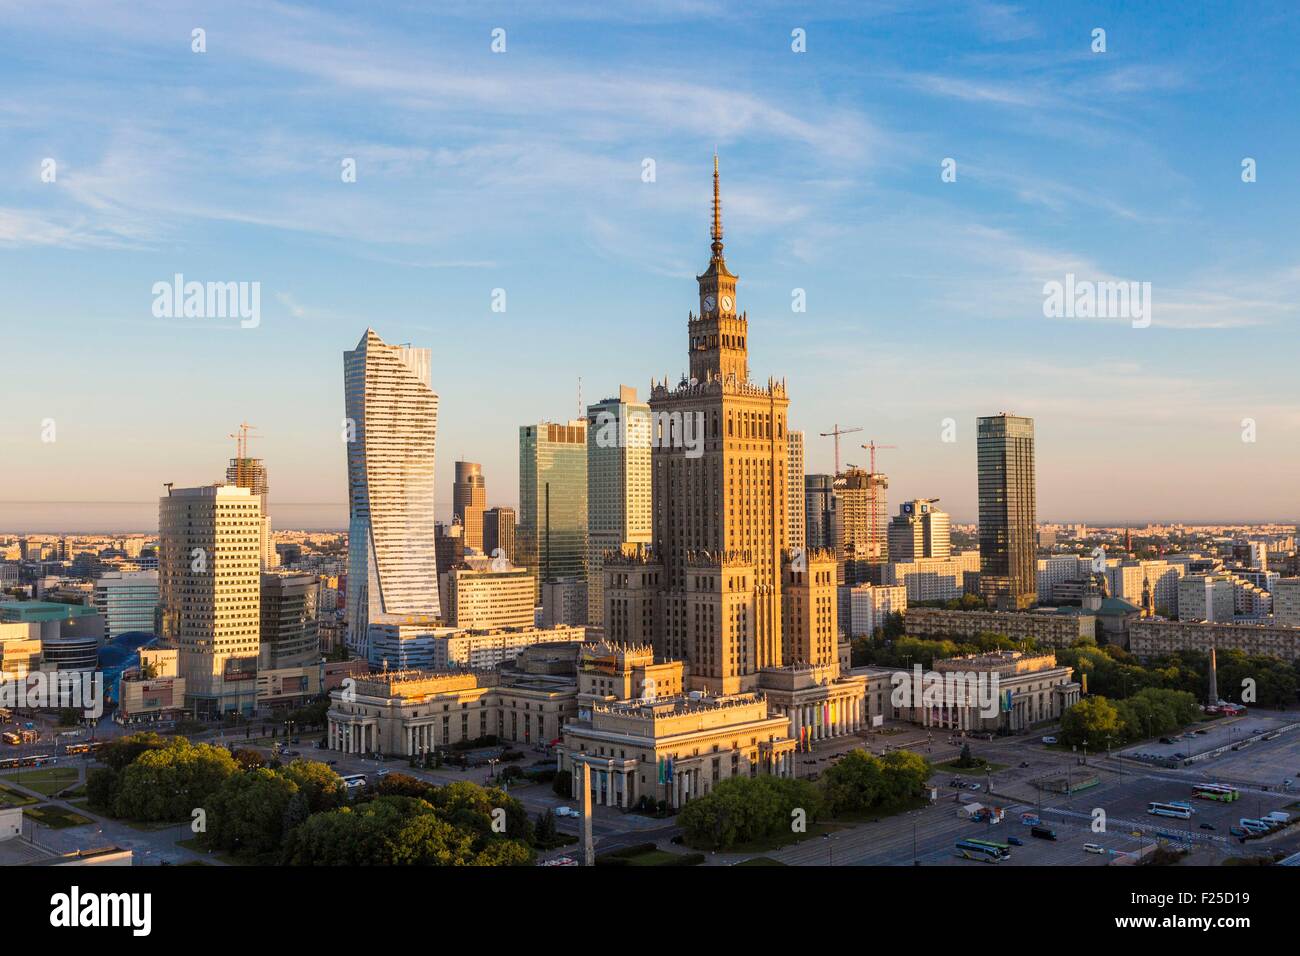 Poland, Mazovia region, Warsaw financial center and Palace of Culture and Sciences Stock Photo